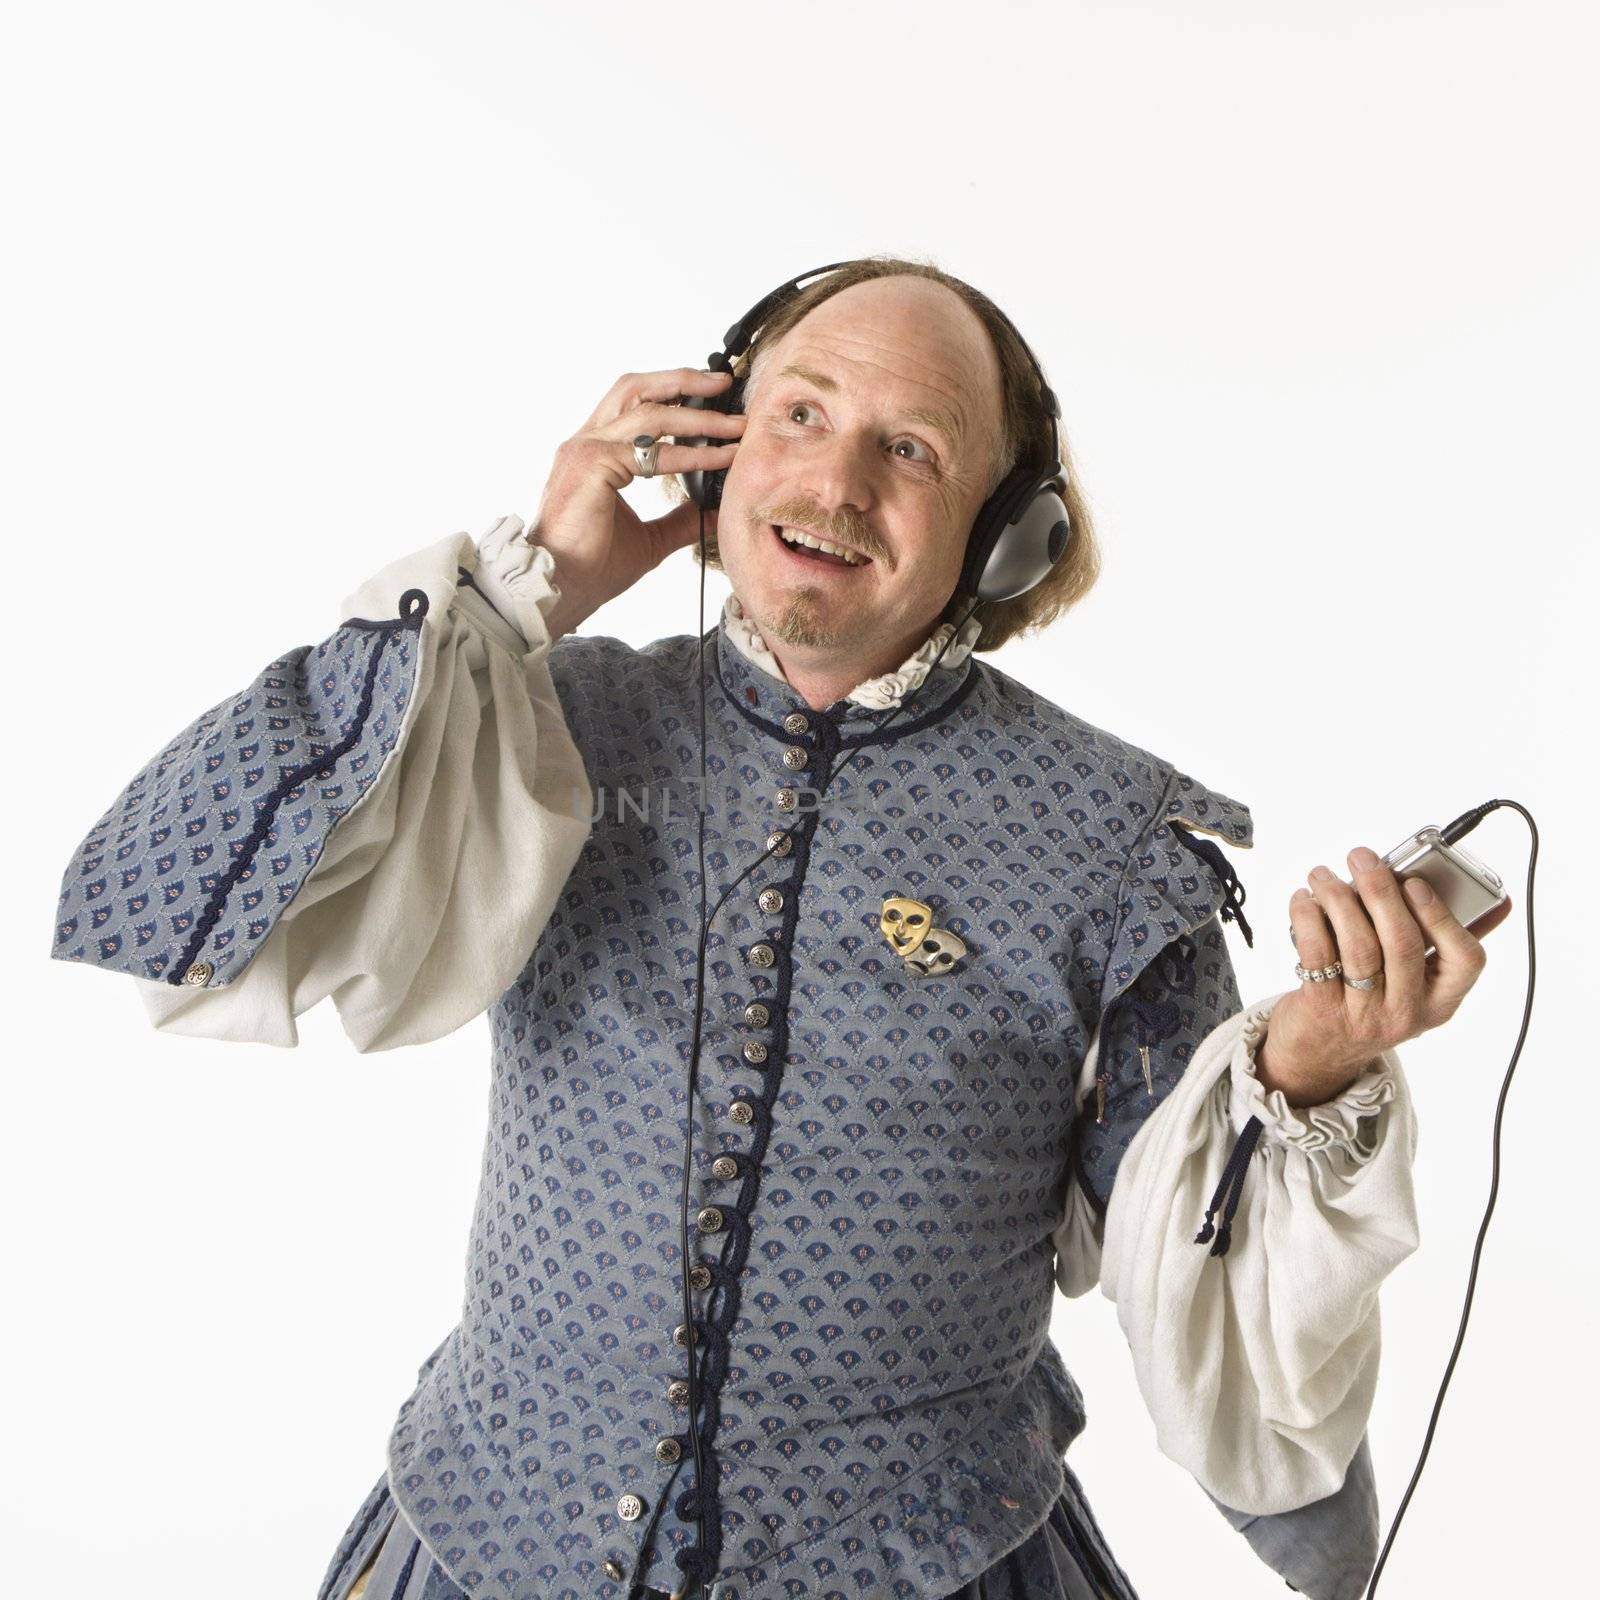 William Shakespeare in period clothing listening to mp3 player smiling.